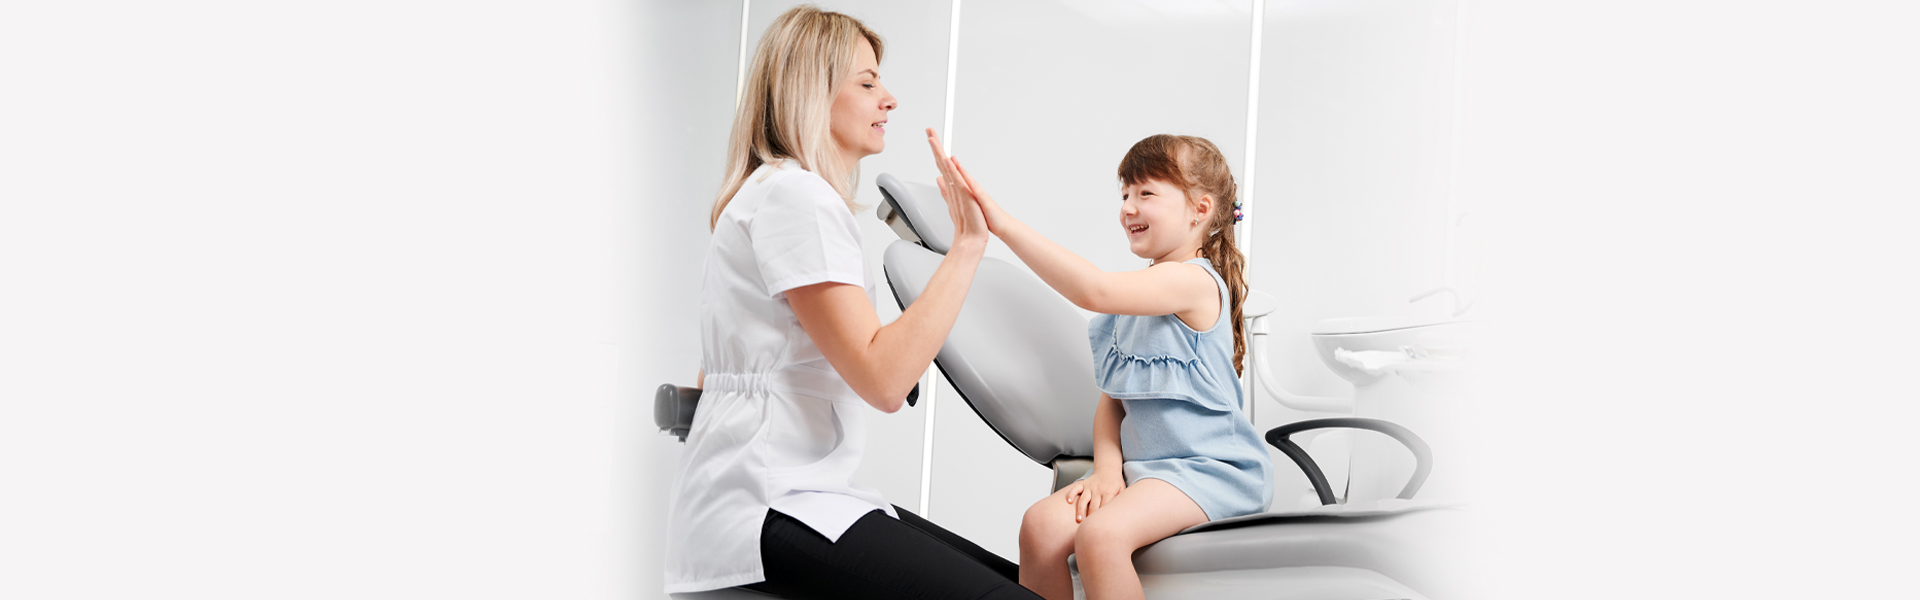 All You Need to Know About Ascent Emergency Room’s Pediatric Care Service